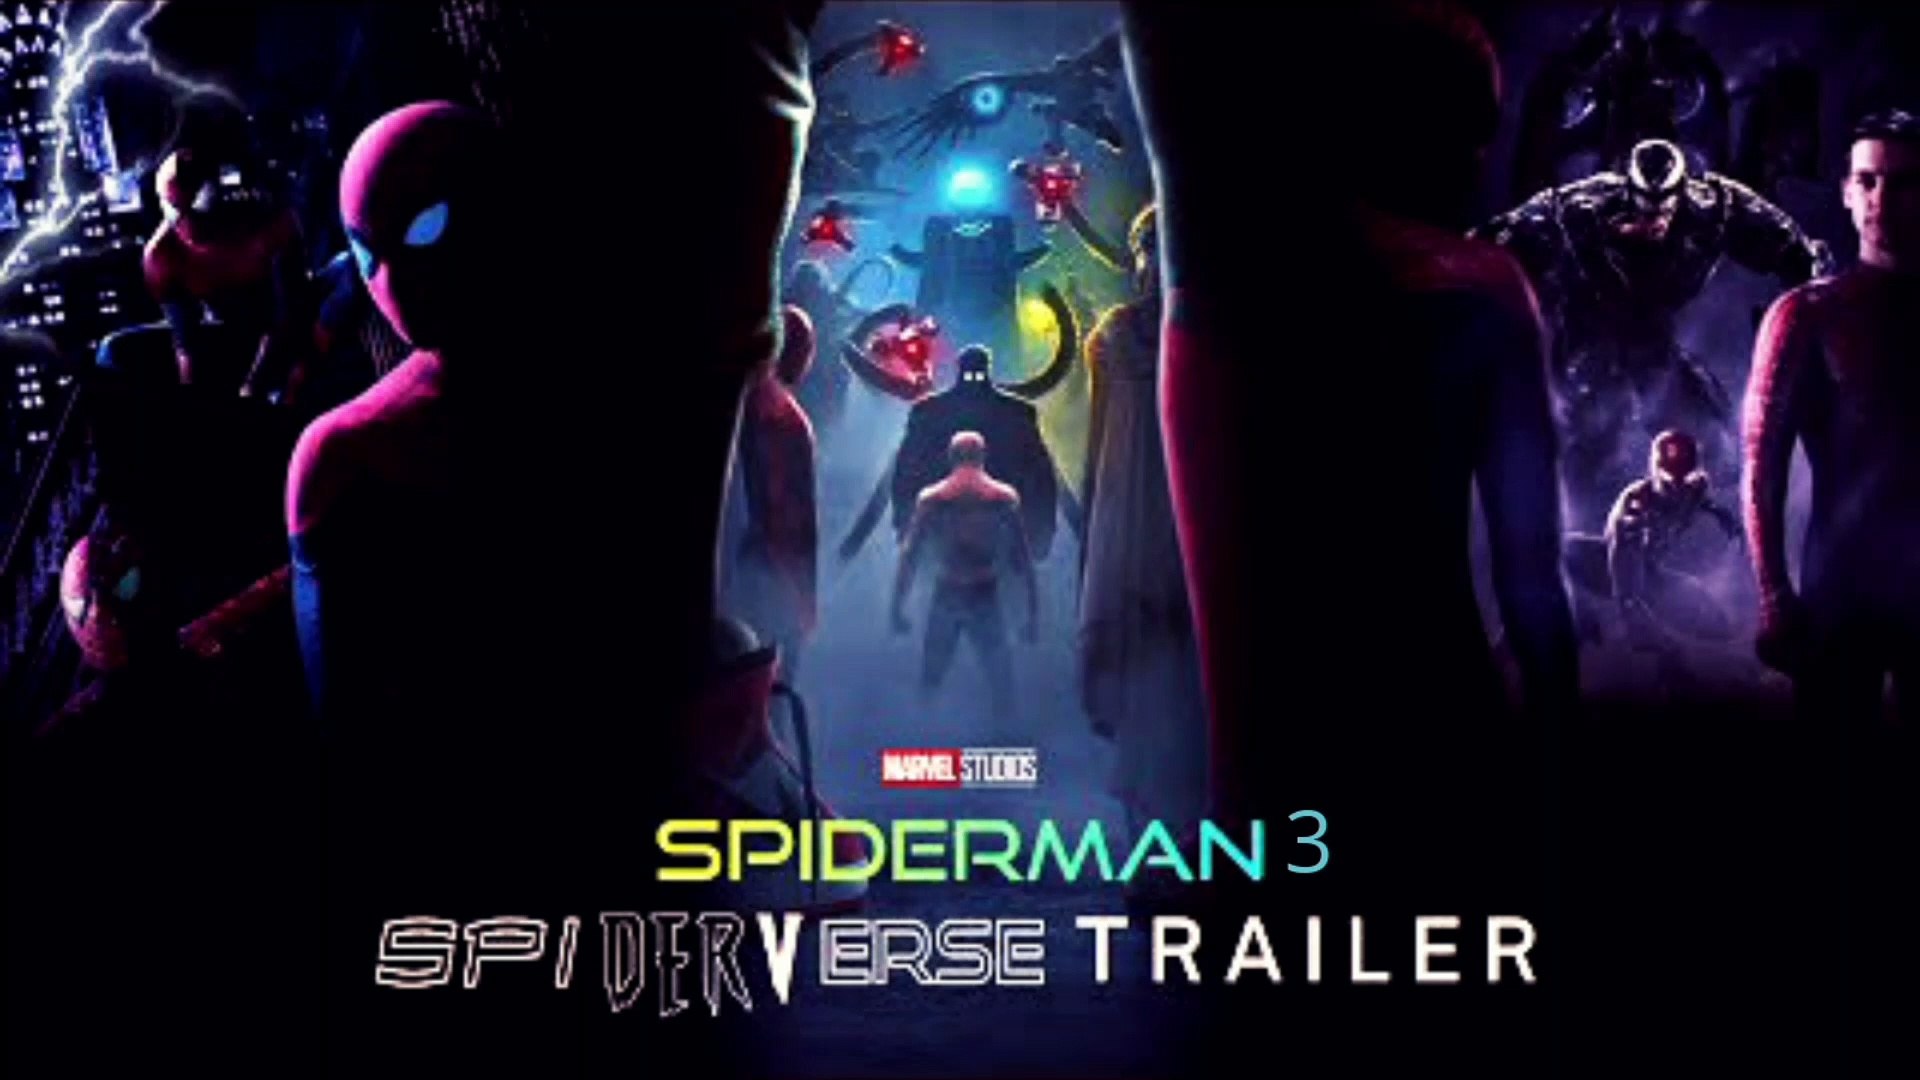 Spiderman 3: SpiderVerse (2021) Official Teaser Trailer | Marvel Studios  Movie Concept - video Dailymotion